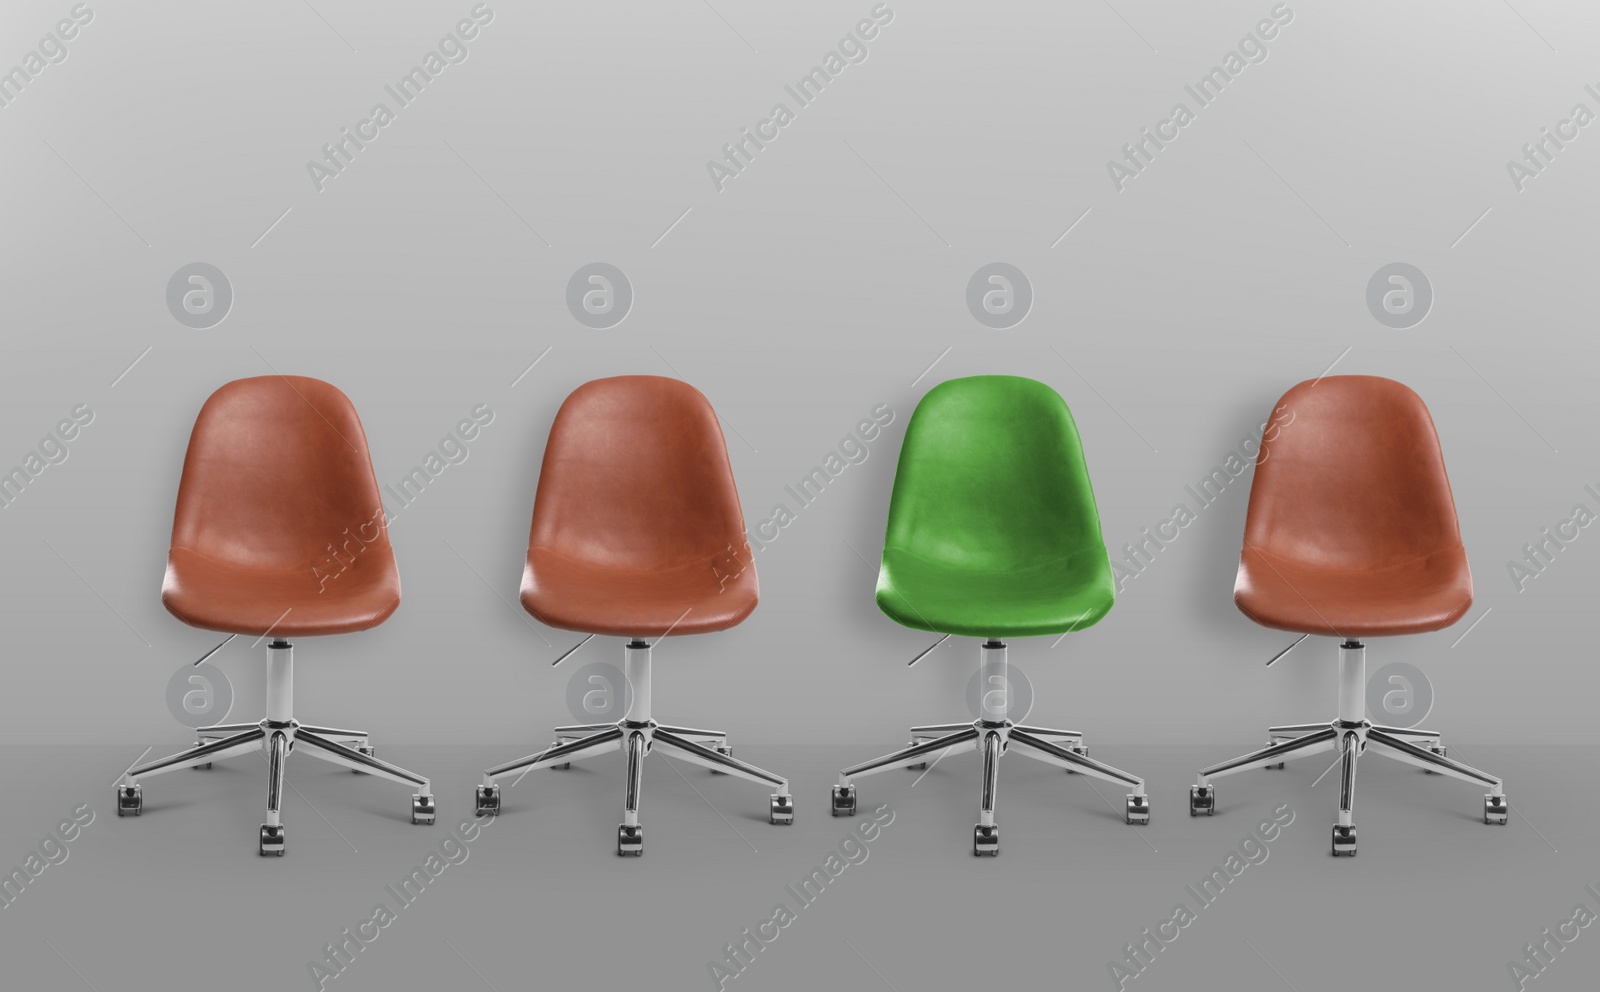 Image of Vacant position. Green office chair among brown ones on grey background